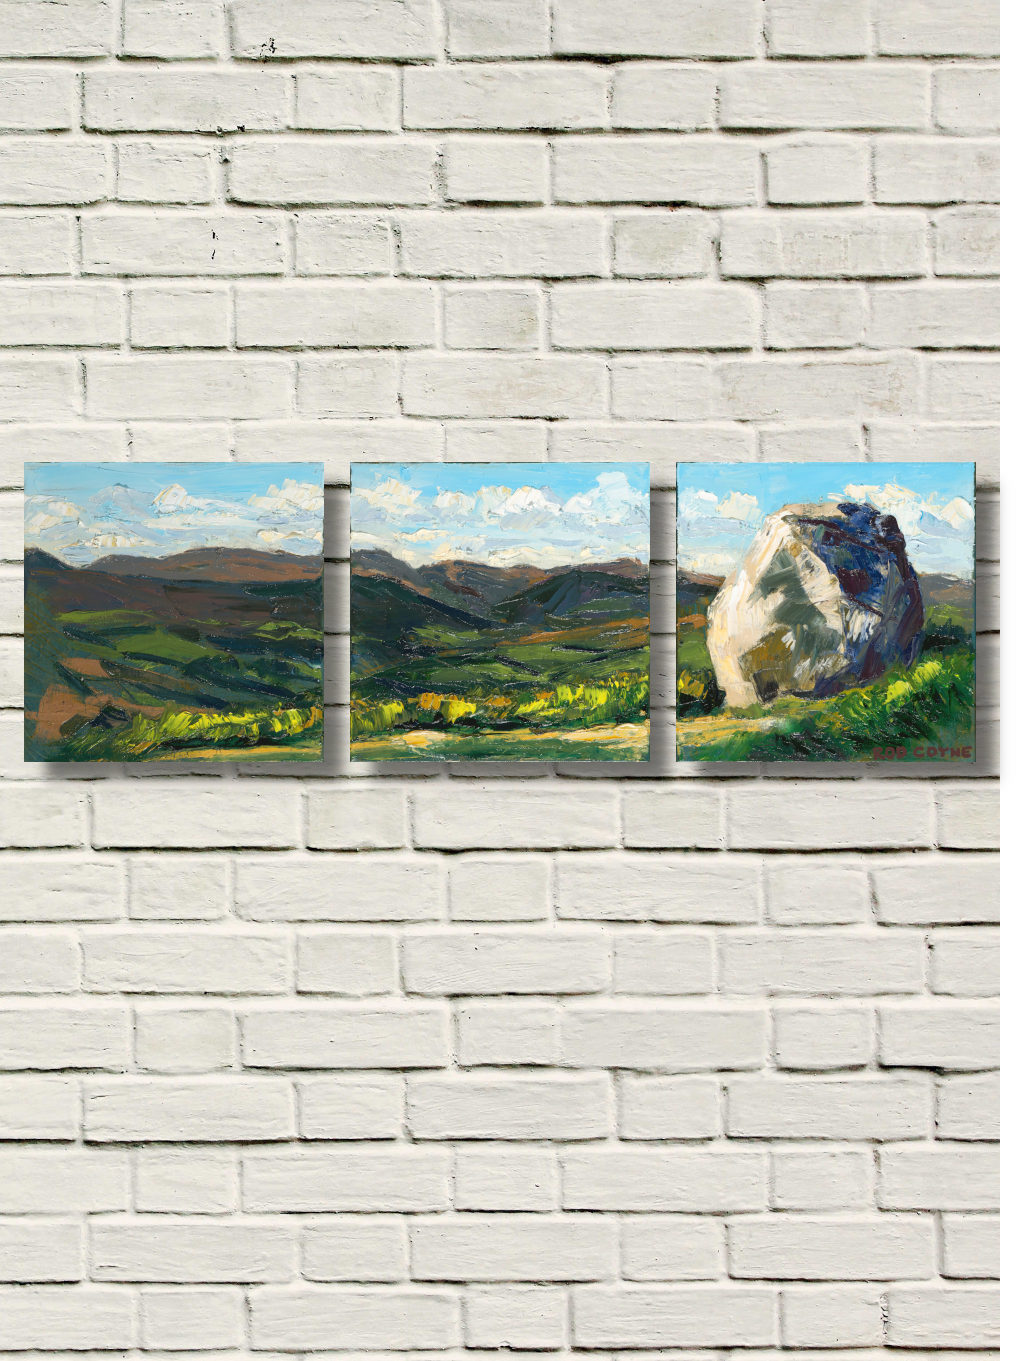 artist rod coyne's triptych painting "mottee stone" is shown here on a white brick wall.